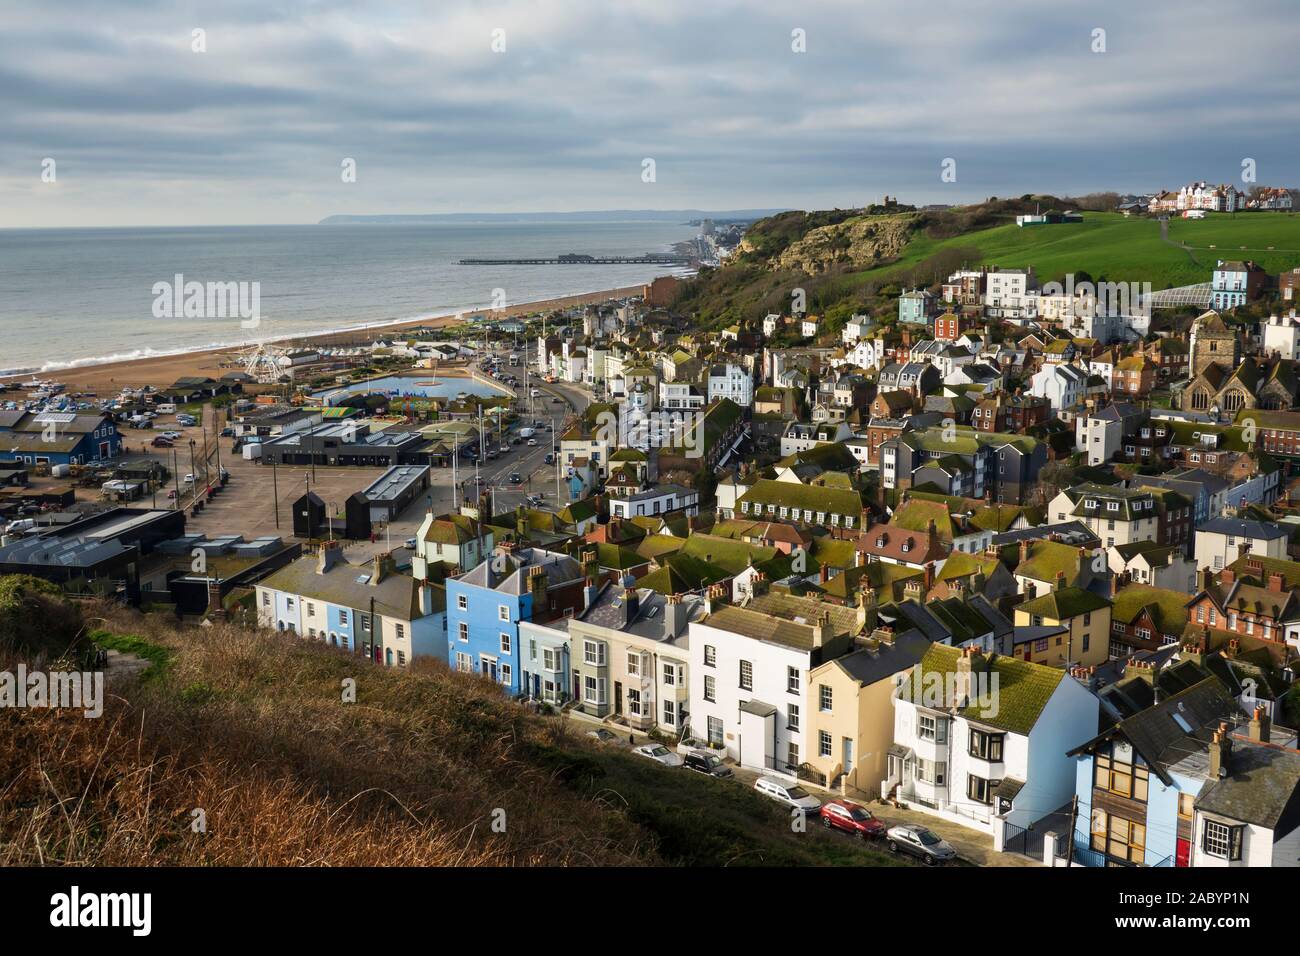 View over the old town and beach with the pier from East Hill, Hastings, East Sussex, England, United Kingdom, Europe Stock Photo